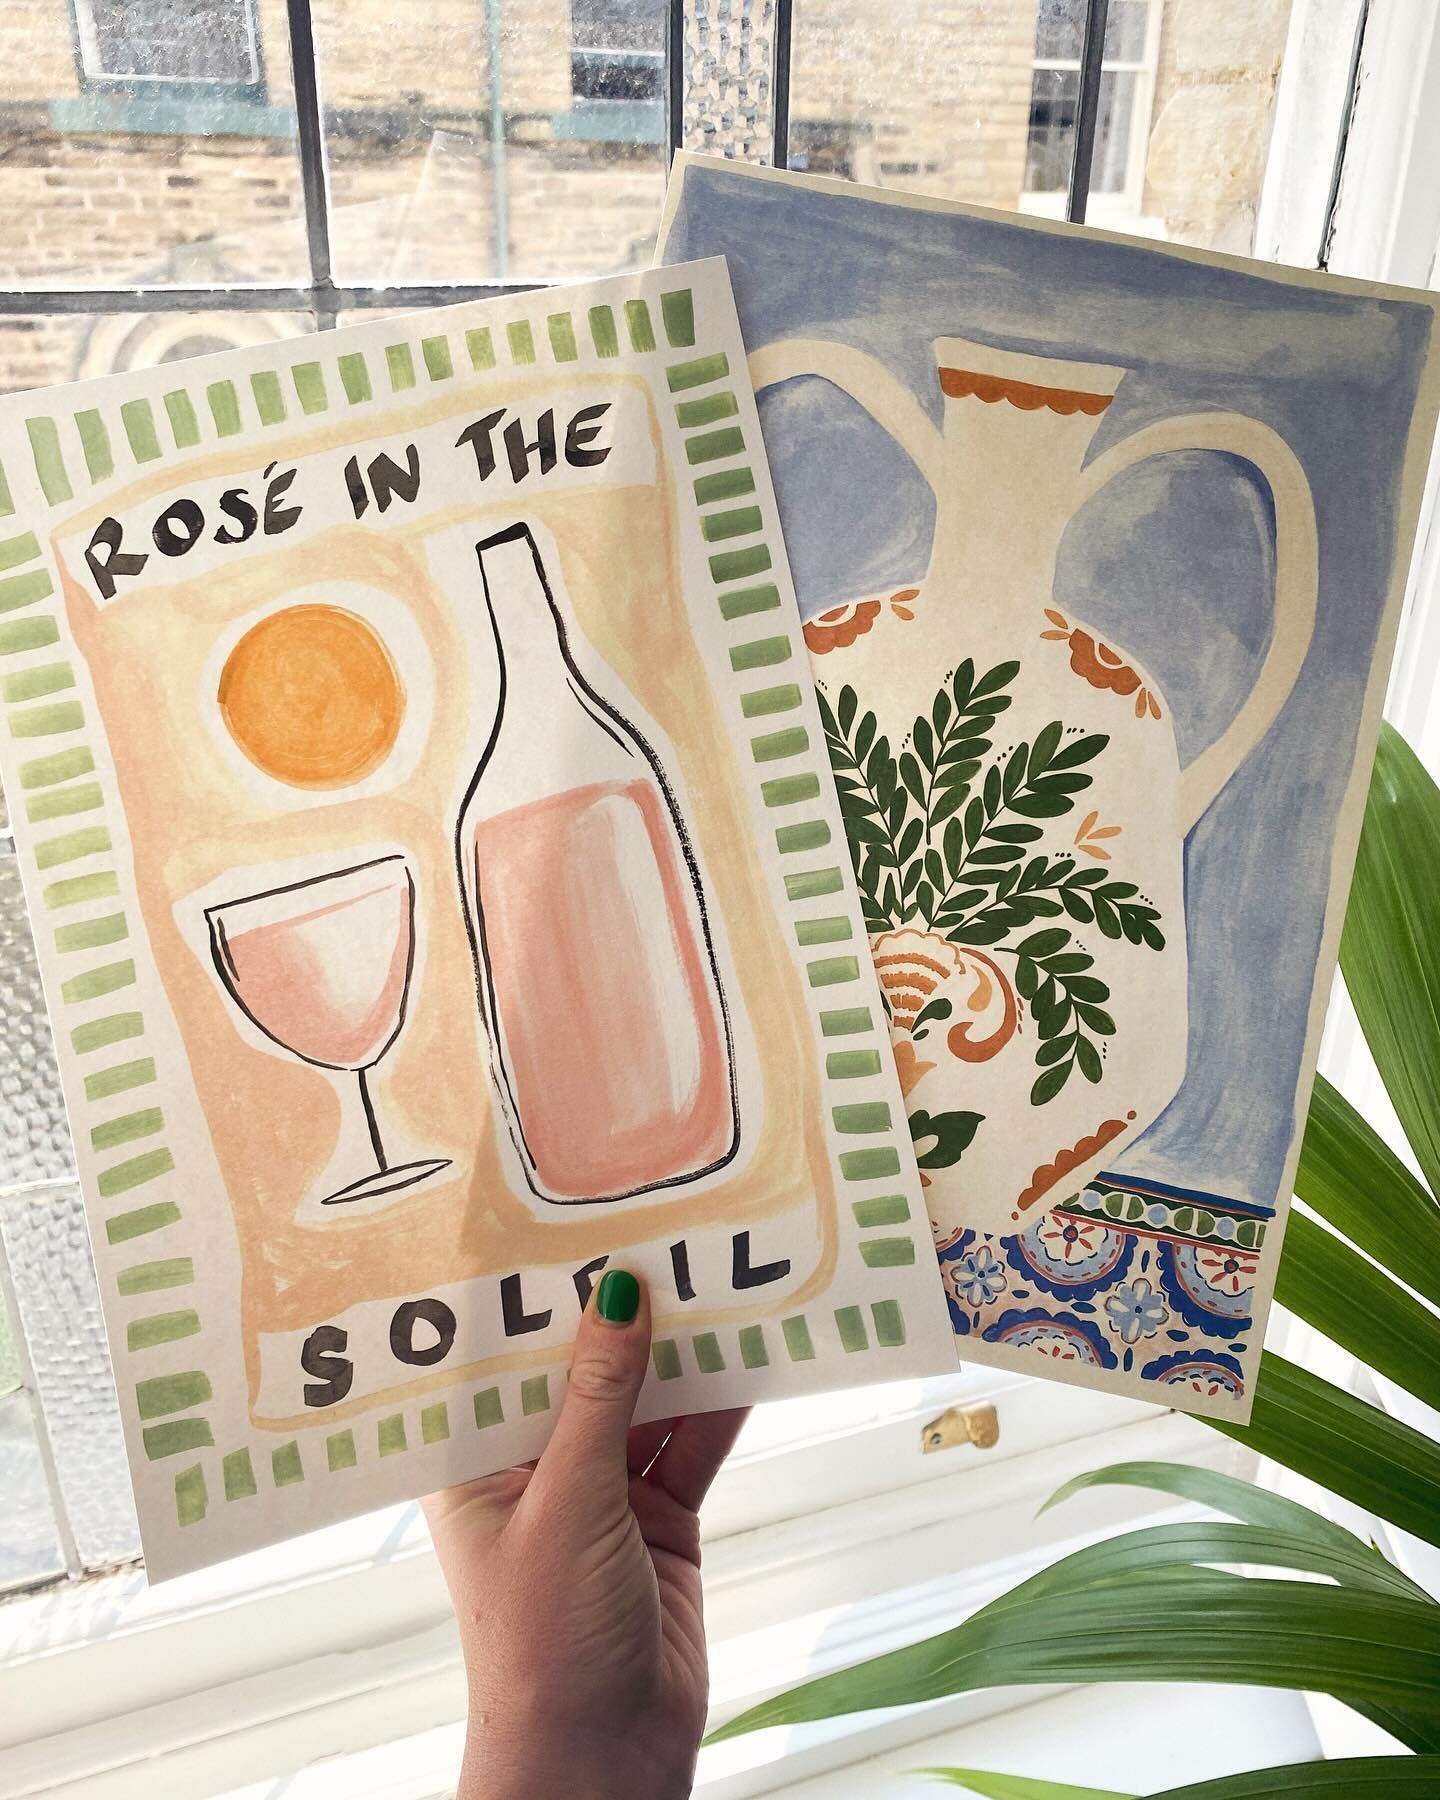 Plans for this weekend, Ros&eacute; in that soleilllll 🌝

Throwback to Lisbon last summer when Calum was introduced to the world of pink 🙌🏻🍷 
.
.
.
#rosewine #ros&eacute;time #roseprint #wineprint #kitchenart #winepainting #lisbonrooftop #lisbonw